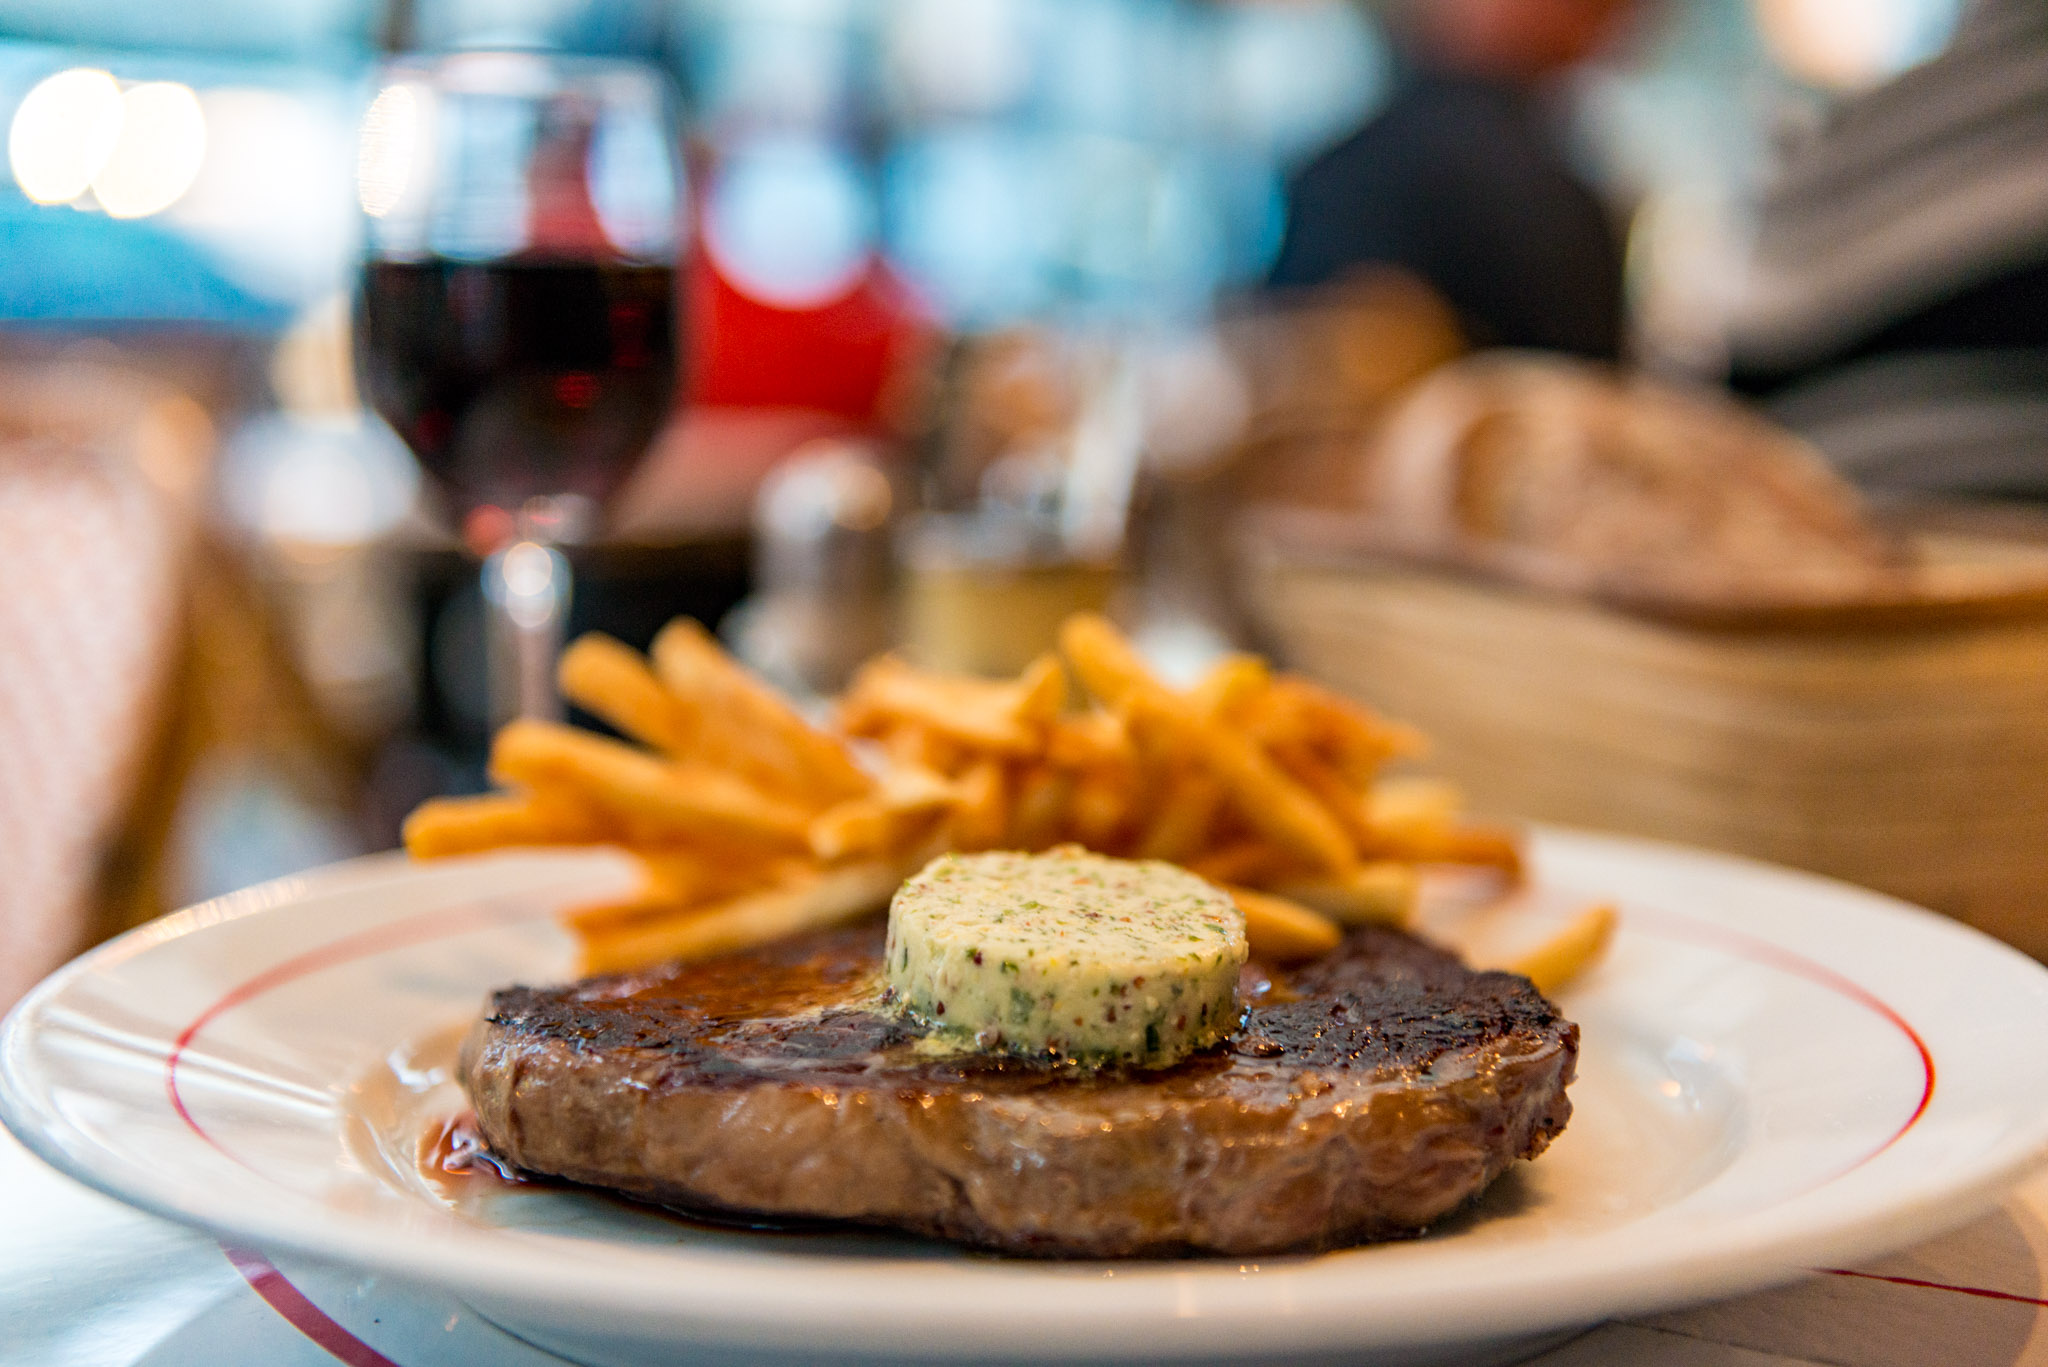 Tuck into steak frites at its best